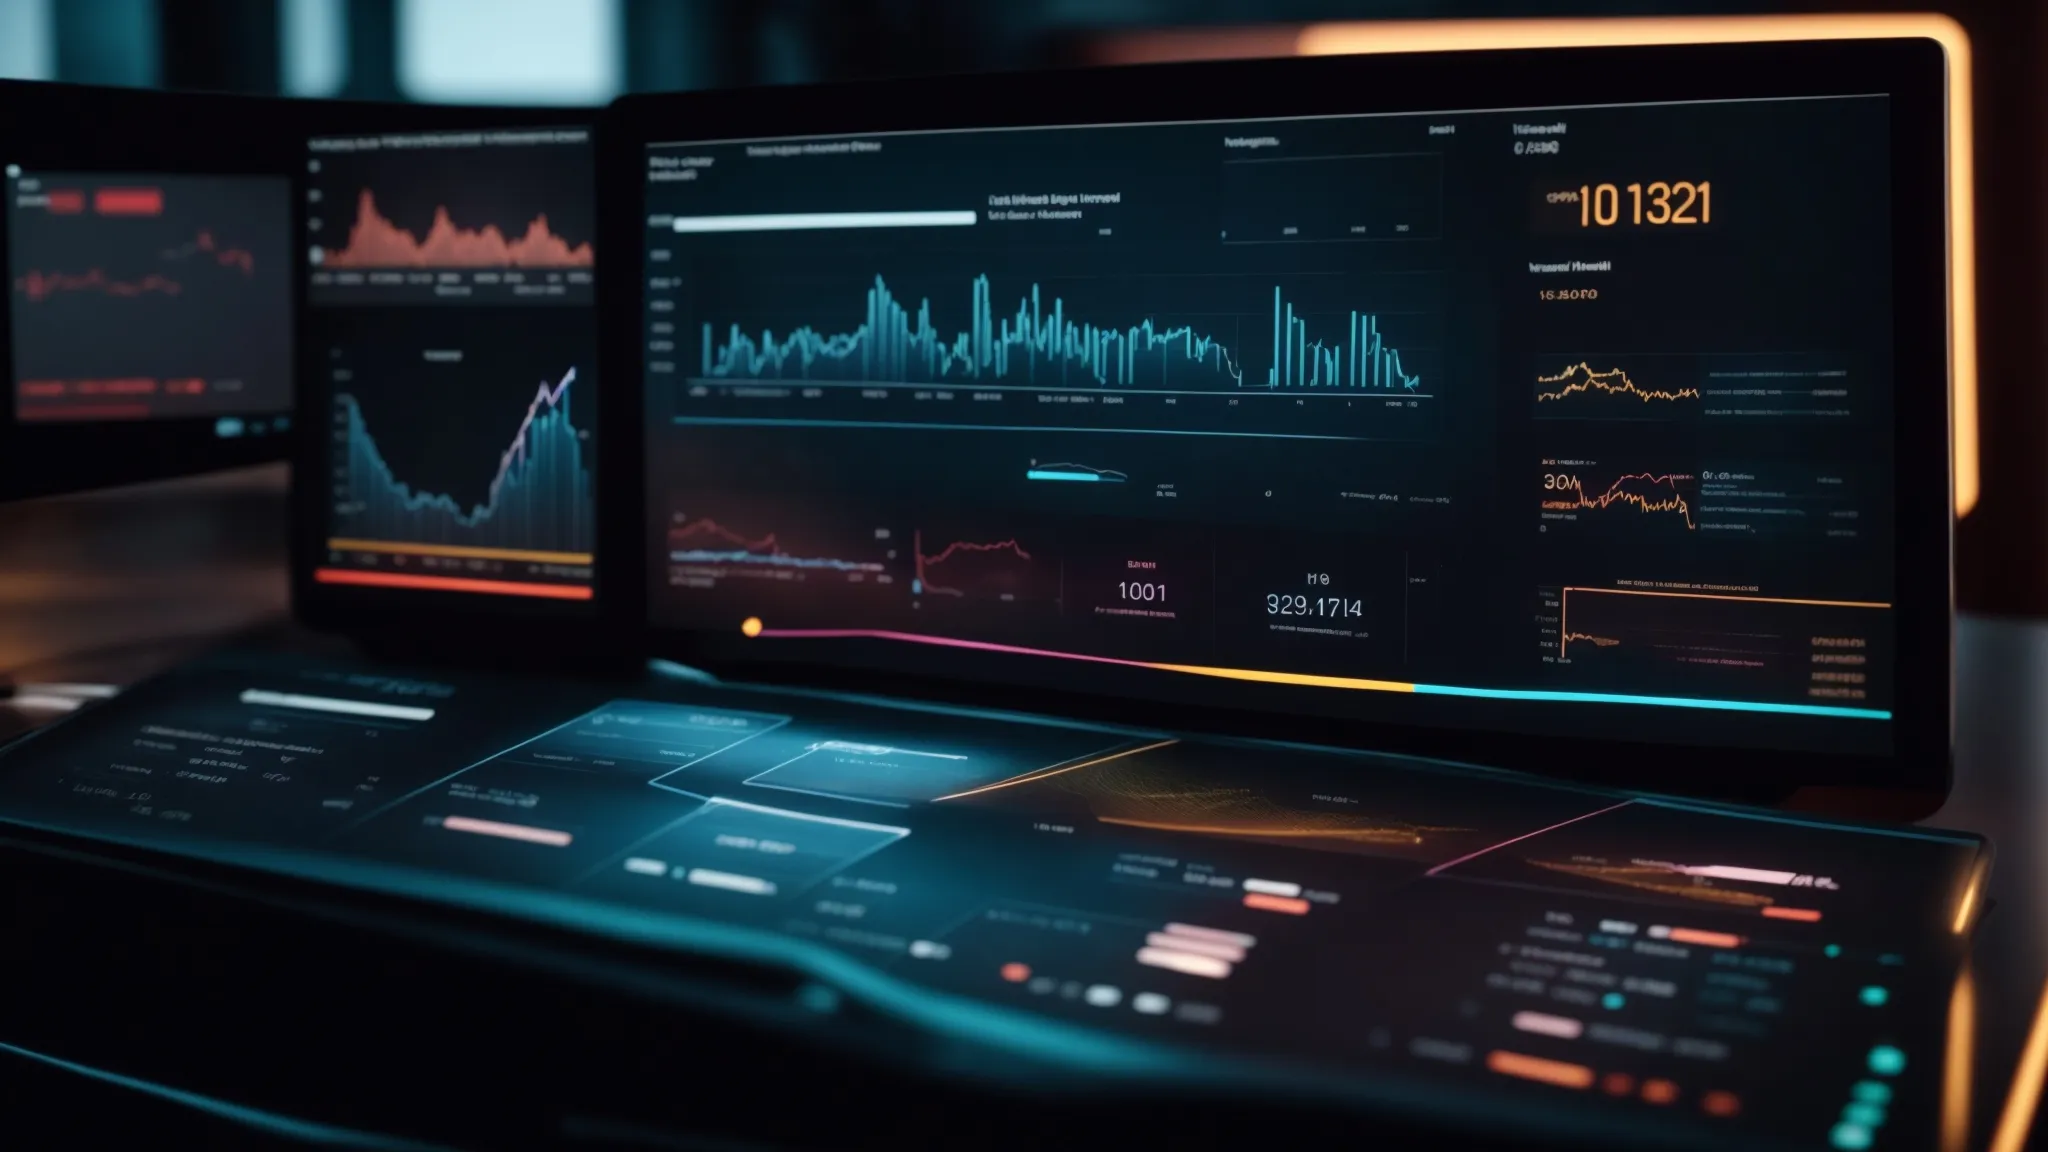 a sleek, futuristic dashboard displaying a variety of complex graphs and charts illuminated by the glow of a computer screen in a dimly lit room.